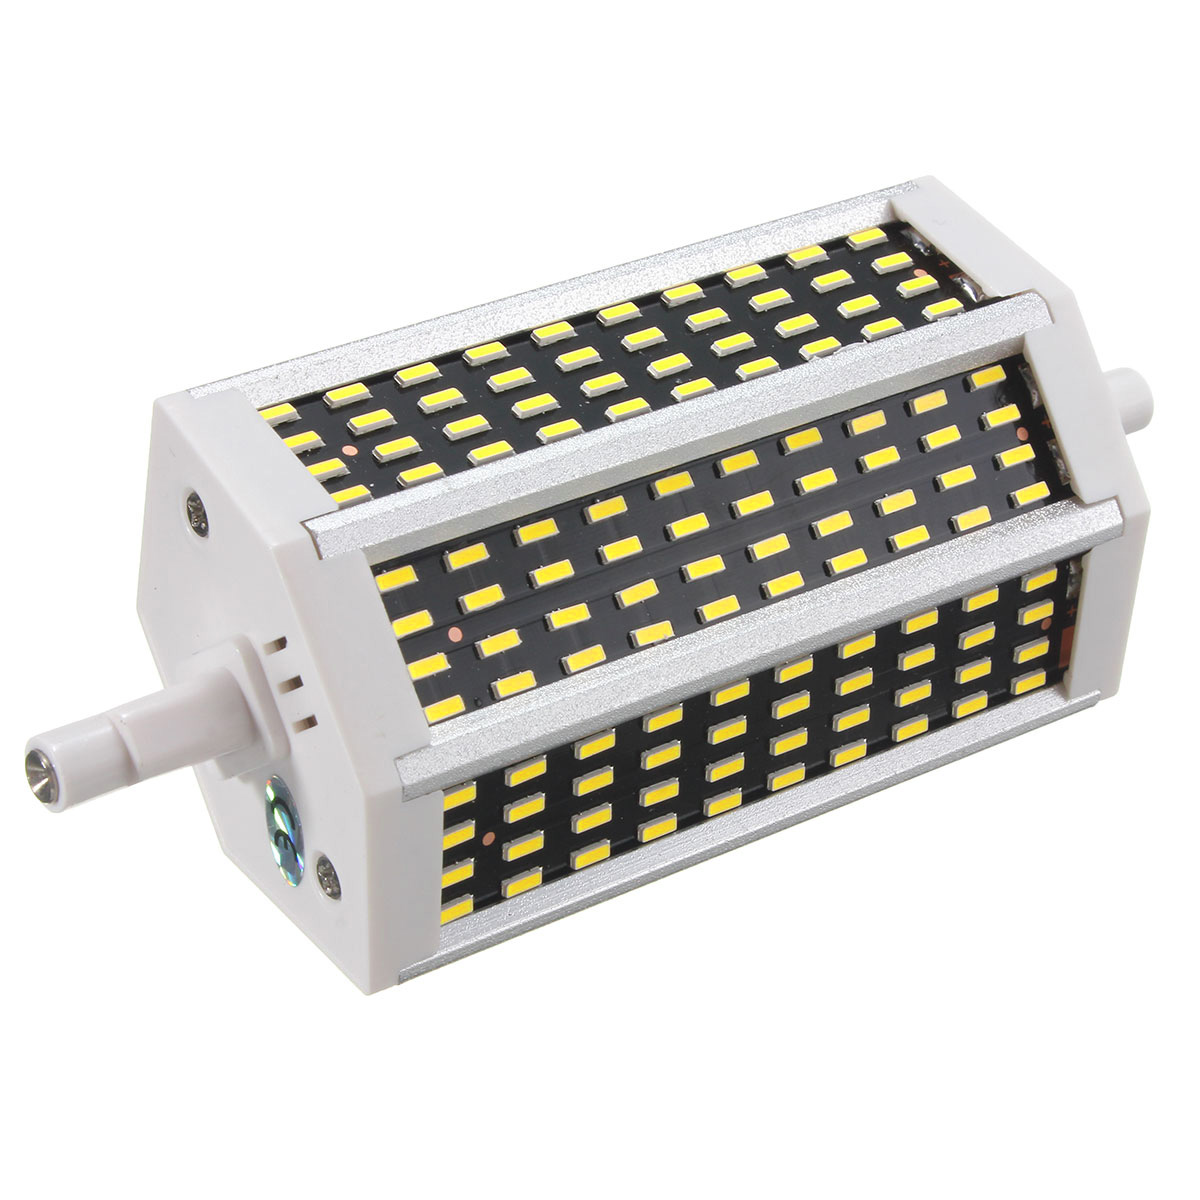 Dimmable-R7S-118mm-15W-120-SMD-4014-LED-Warm-White-Pure-White-Light-Lamp-Bulb-AC220V110V-1059884-10